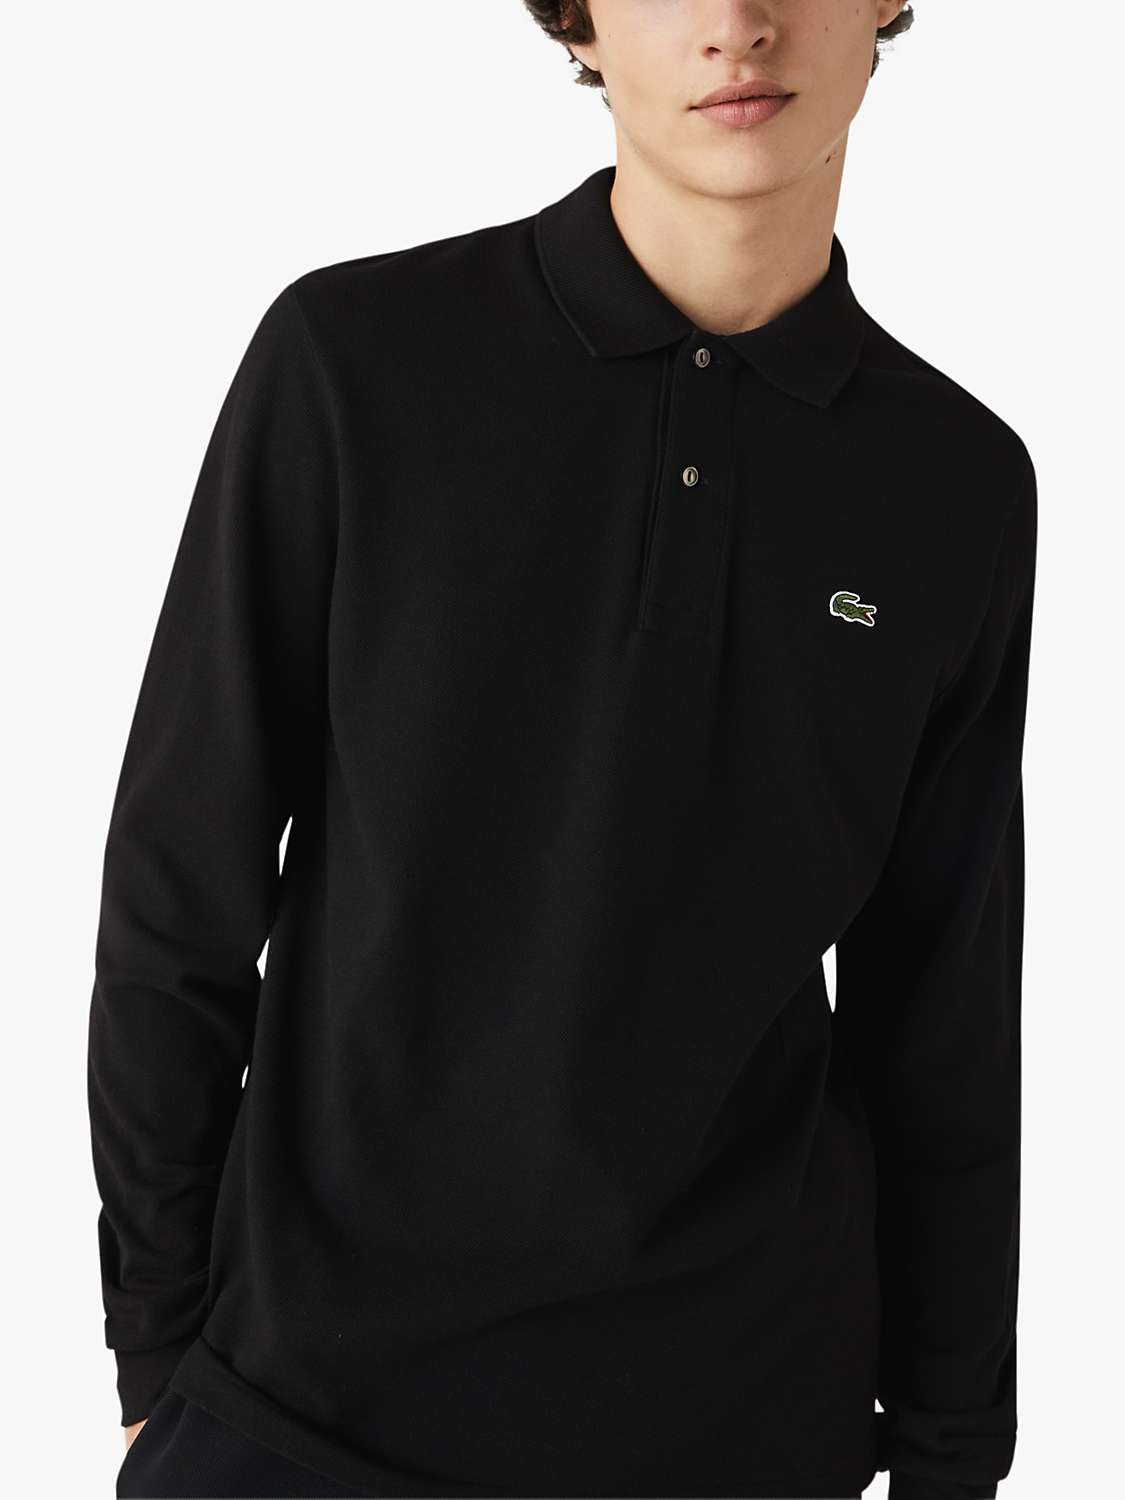 Buy Lacoste L.13.12 Classic Regular Fit Long Sleeve Polo Shirt Online at johnlewis.com